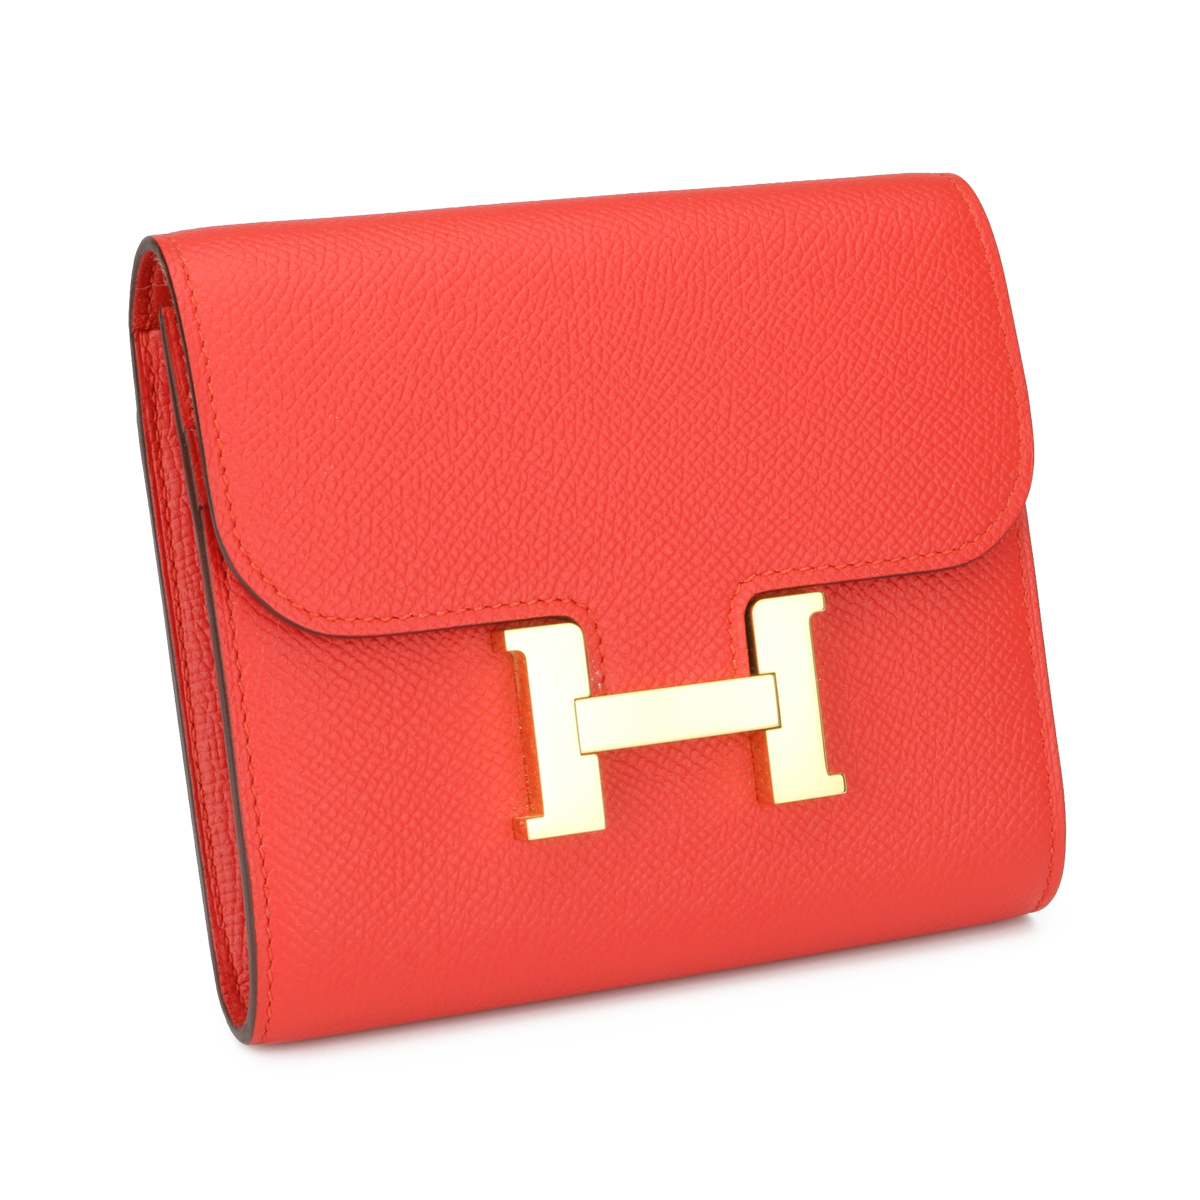 Hermes 2018 red packet envelope for trio kelly constance wallet petit h  charm